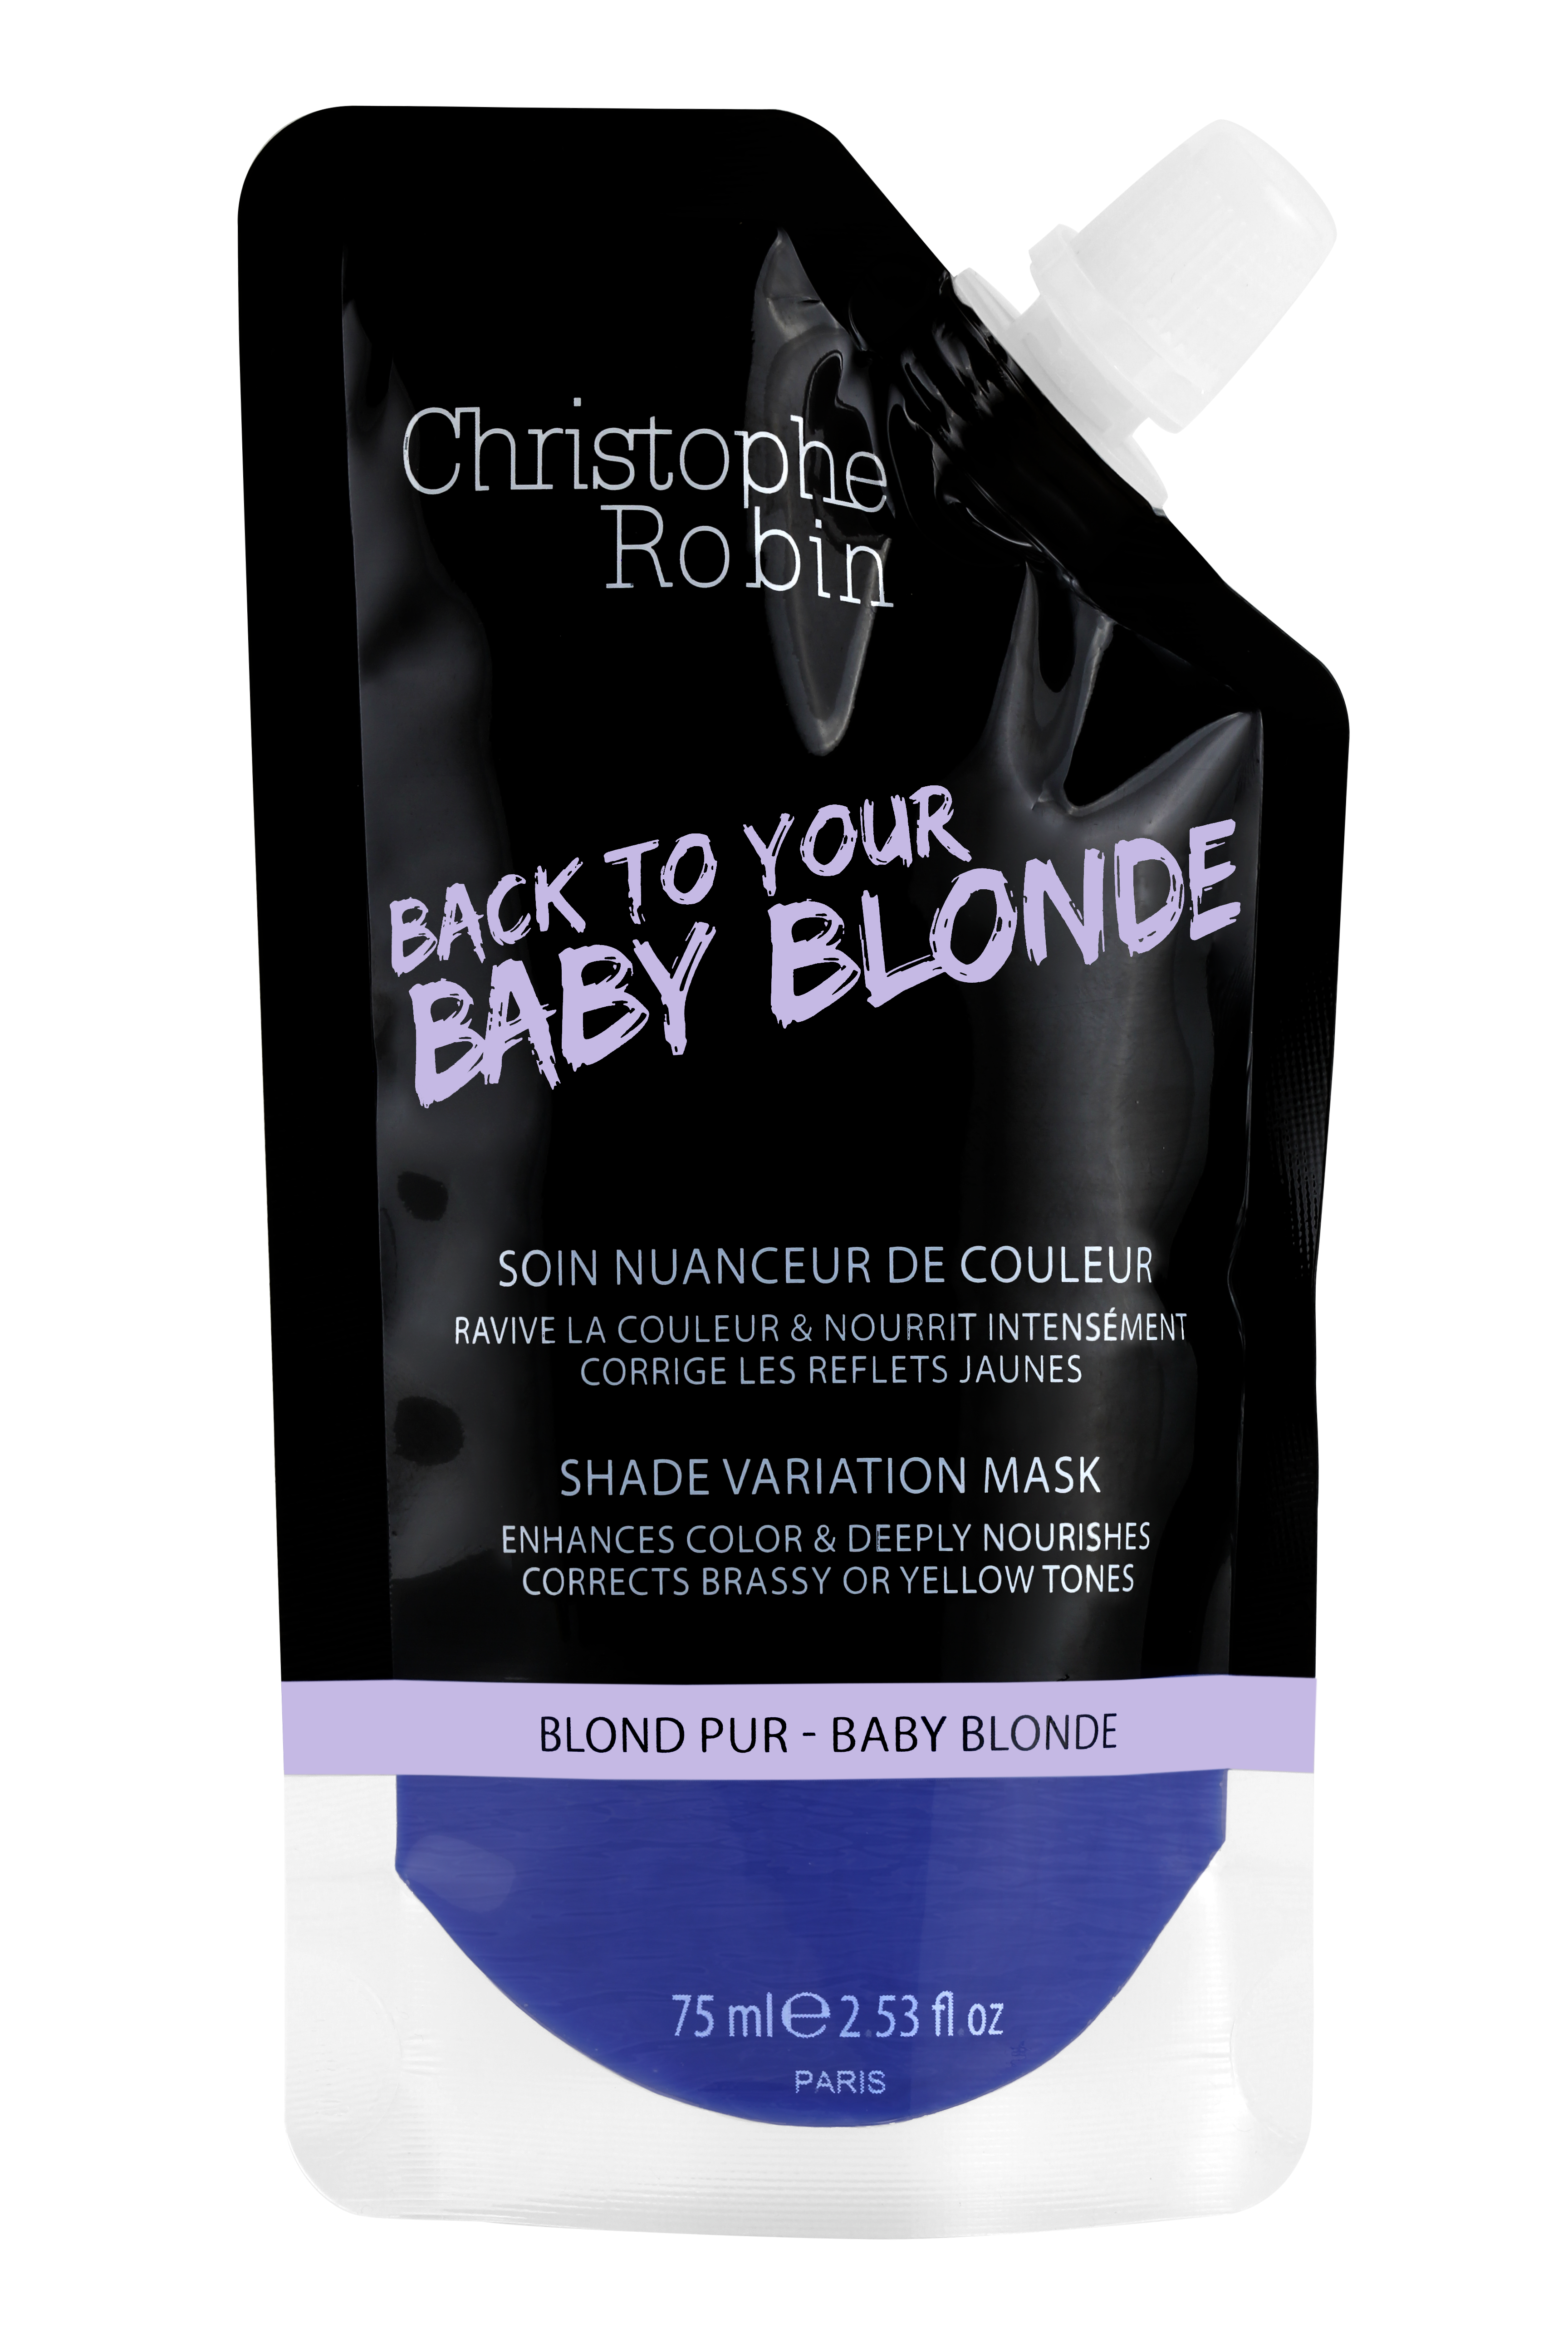 Image of Christophe Robin Back to your Baby Blond Tönung - 75ml